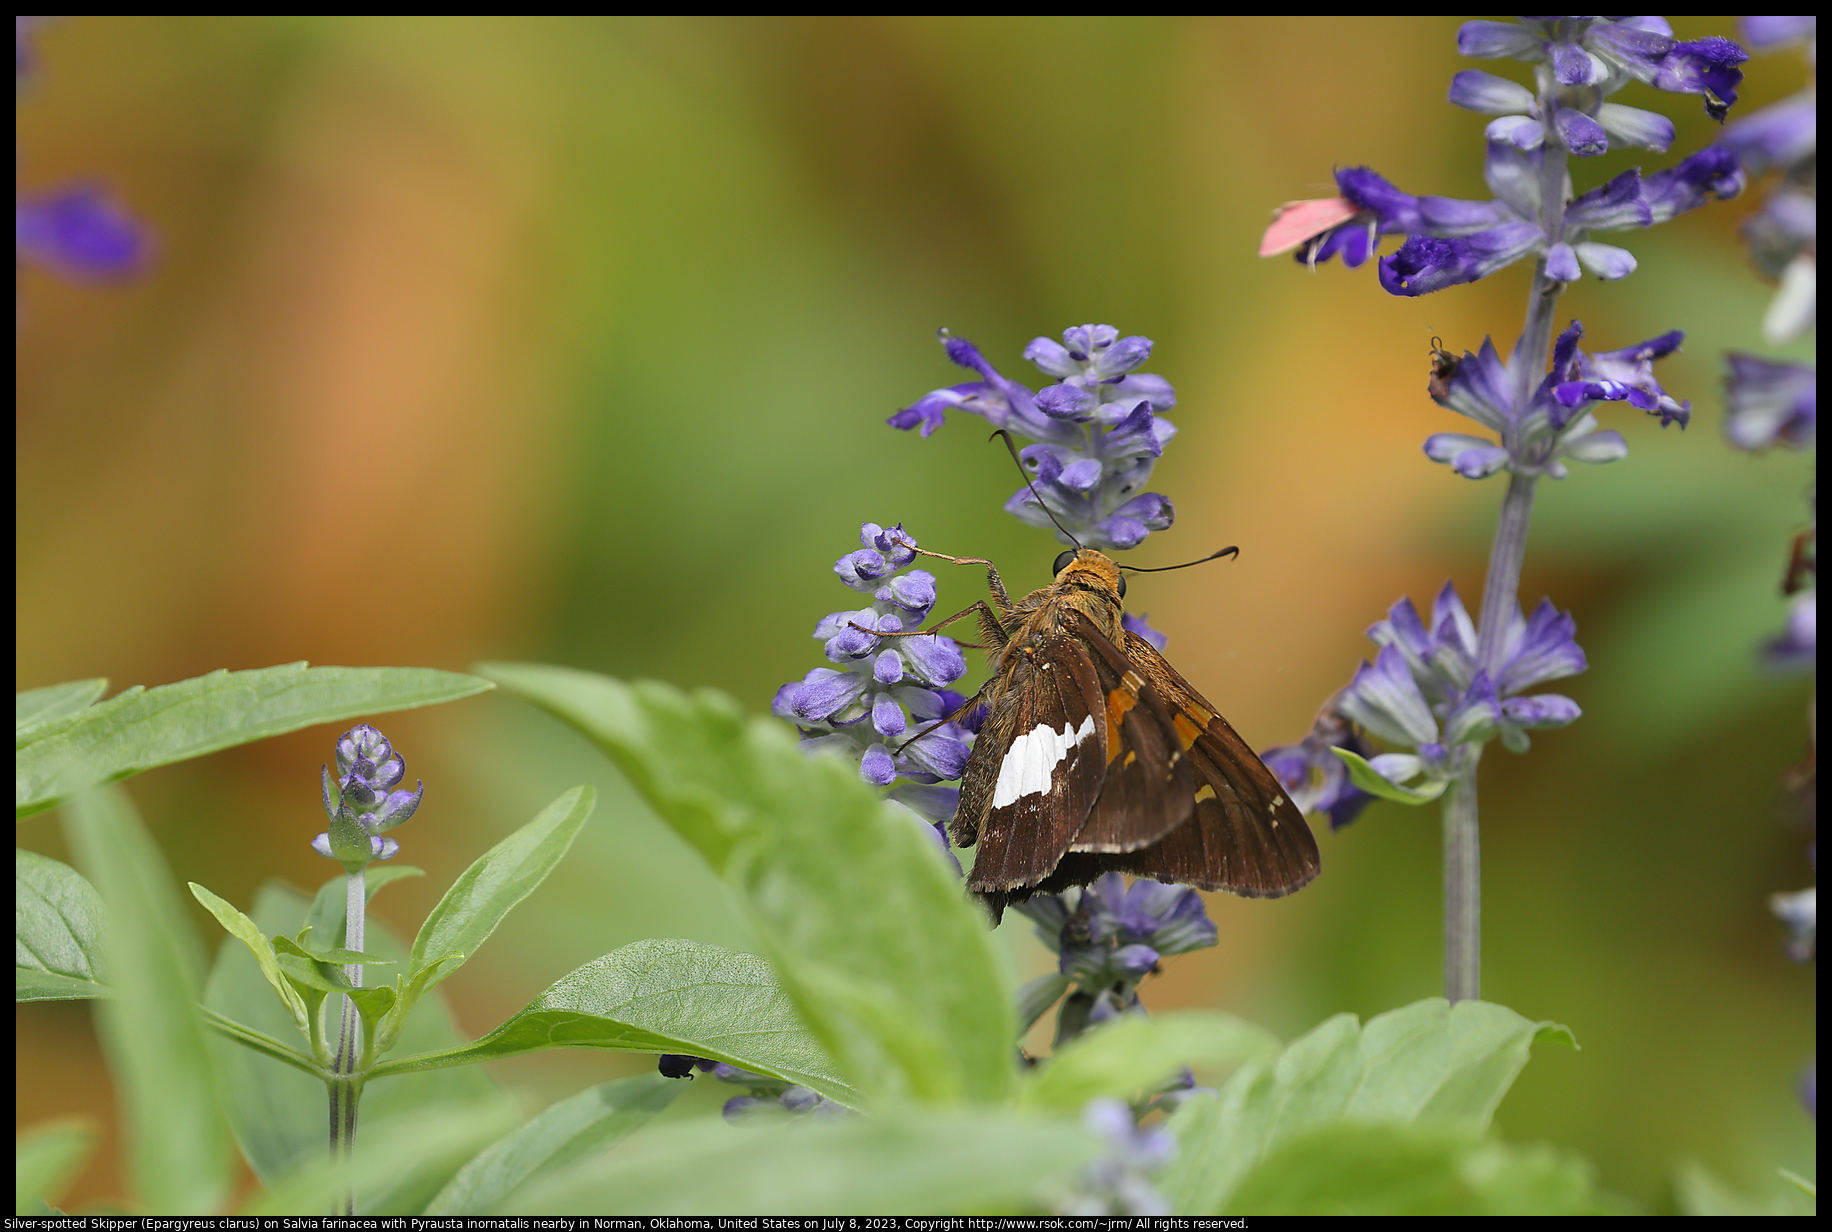 Silver-spotted Skipper (Epargyreus clarus) on Salvia farinacea with Pyrausta inornatalis nearby in Norman, Oklahoma, United States on July 8, 2023